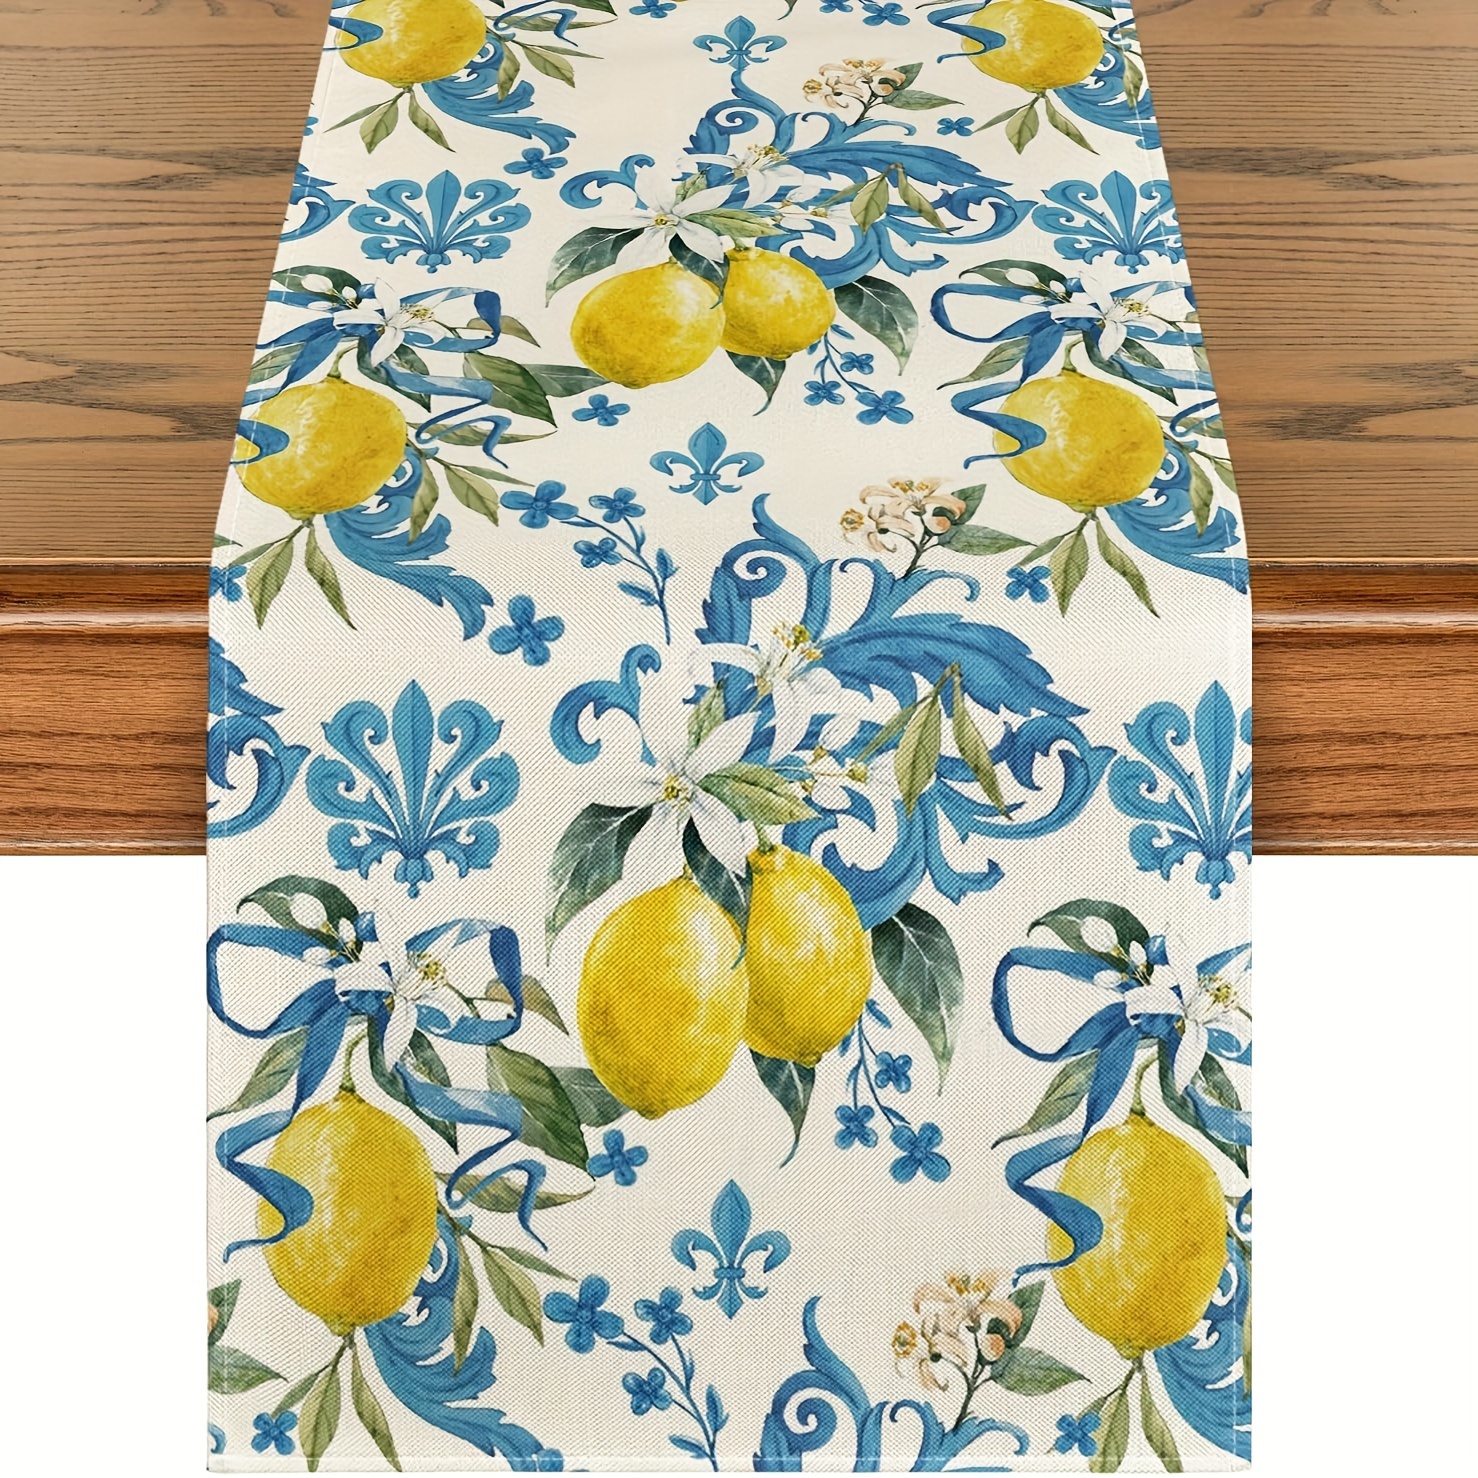 

1pc, Table Runner, Fresh Lemon Printed Table Runner, Spring Theme Floral Design, Dustproof & Wipe Clean Table Runner, Perfect For Home Party Decor, Dining Table Decoration, Aesthetic Room Decor